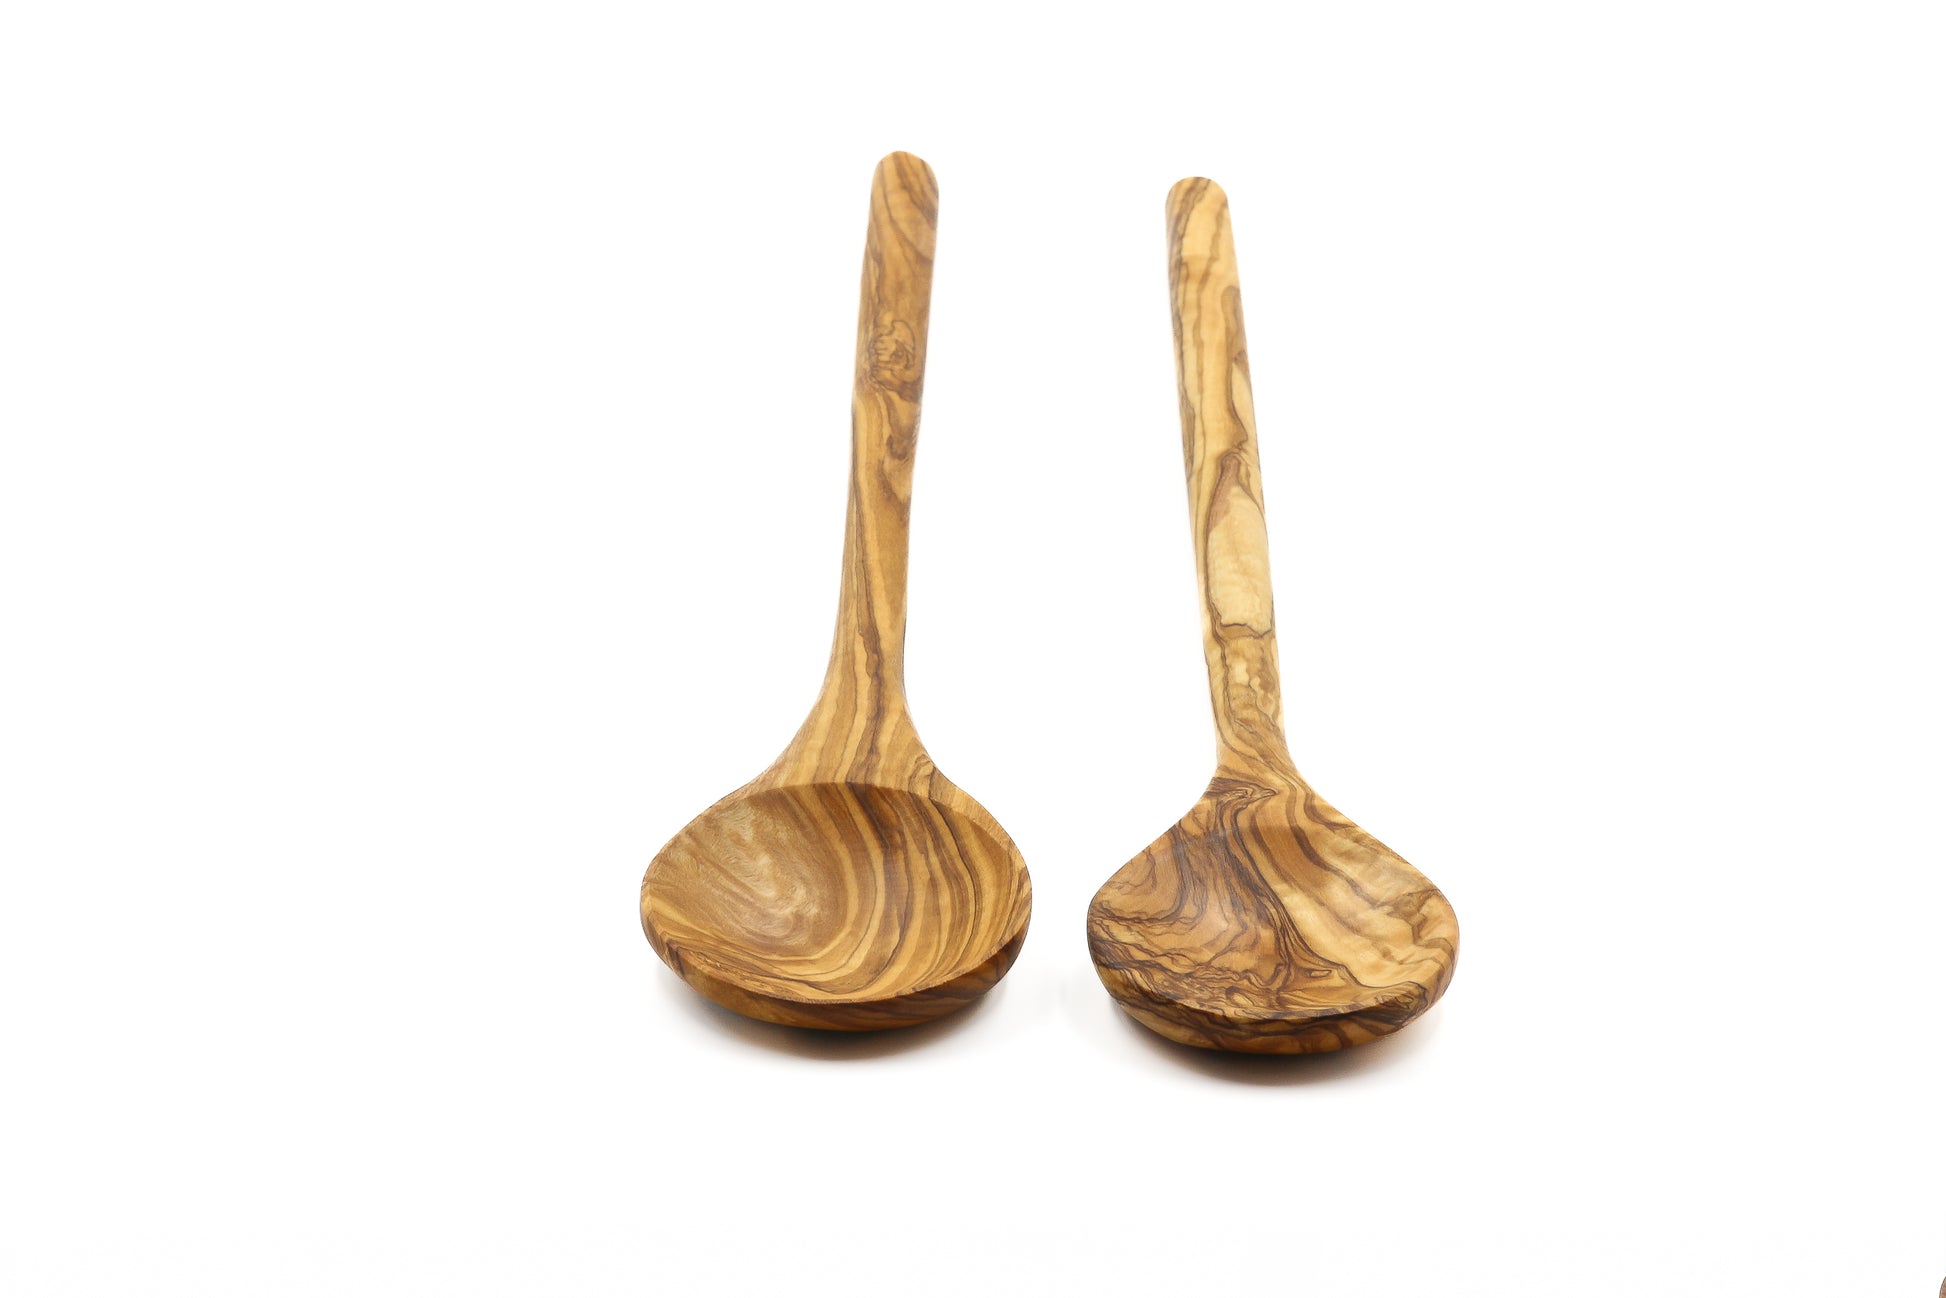 Crafted from olive wood, a stirring, mixing, and cooking essential